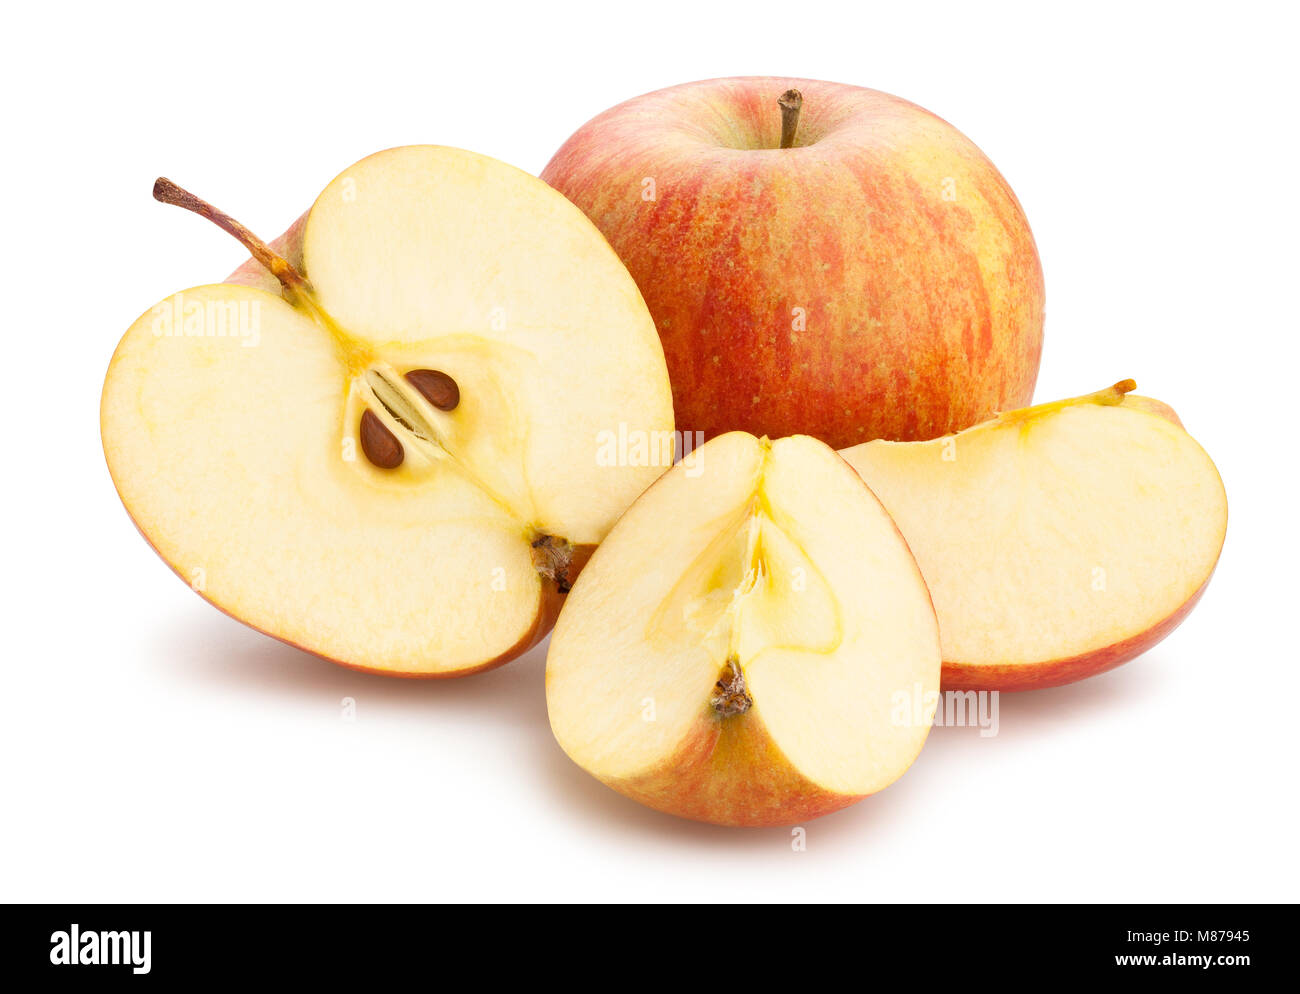 sliced striped apples path isolated Stock Photo